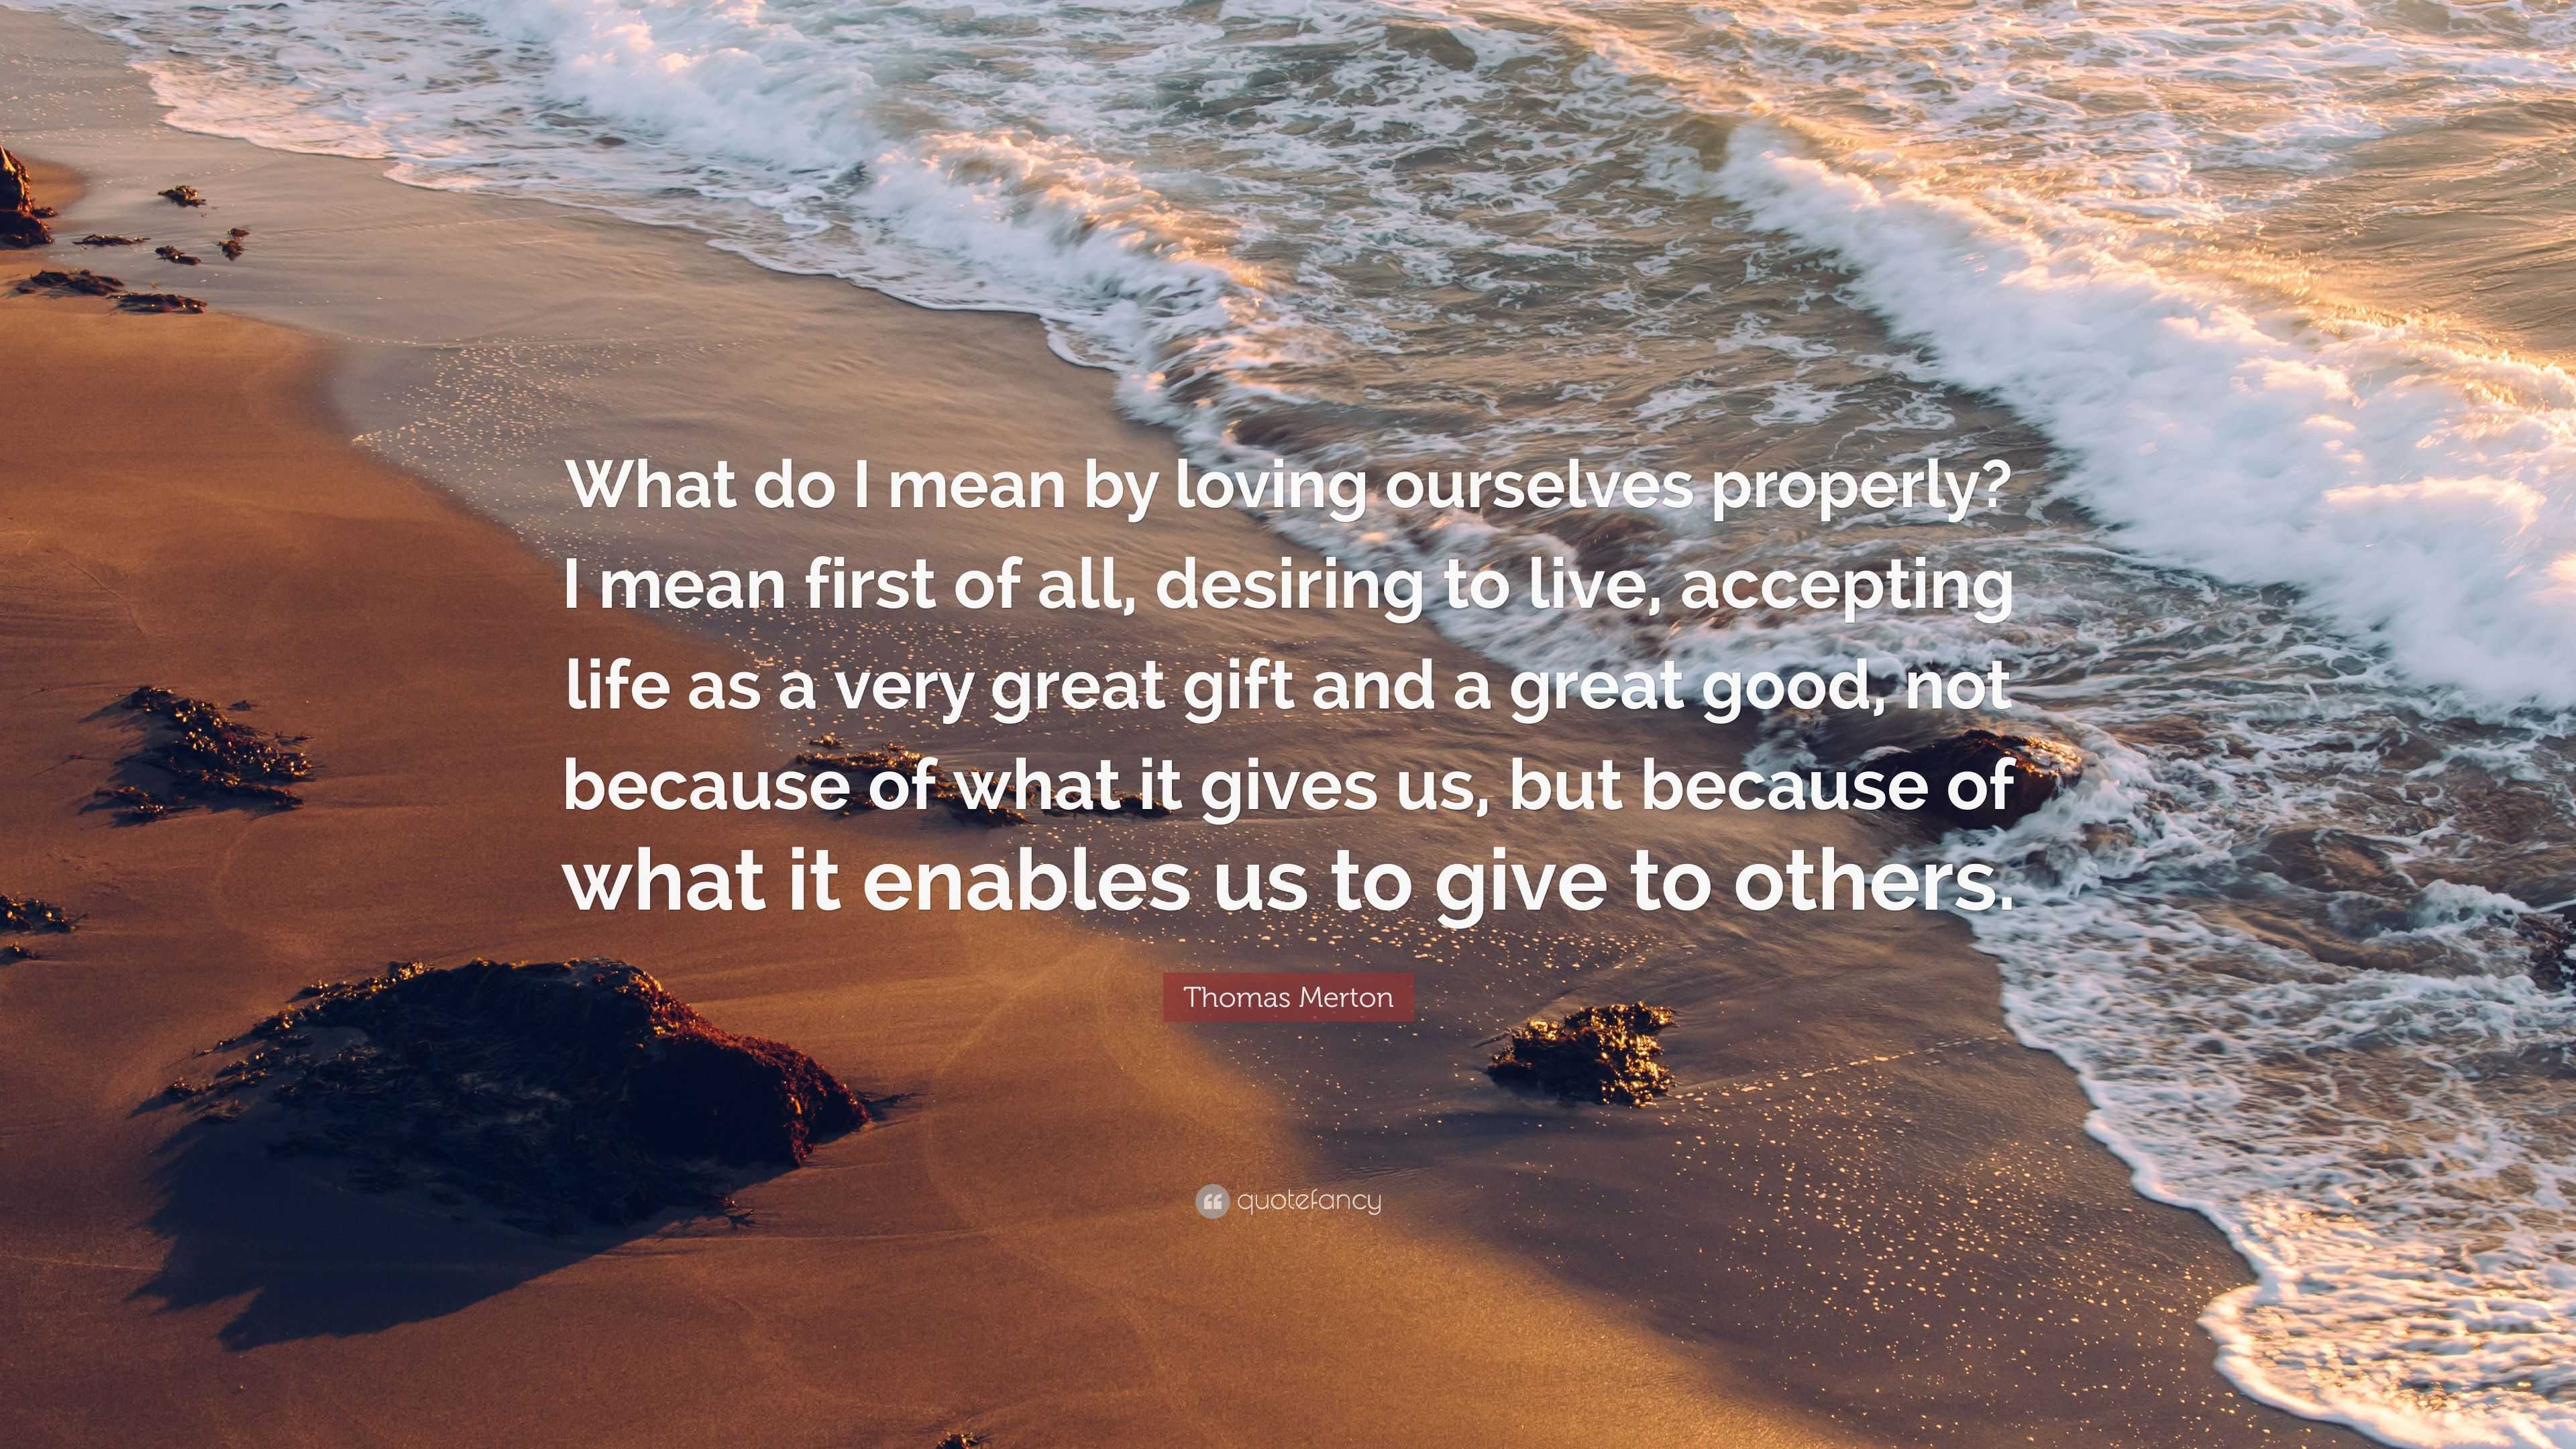 Thomas Merton Quote: “What do I mean by loving ourselves properly? I ...